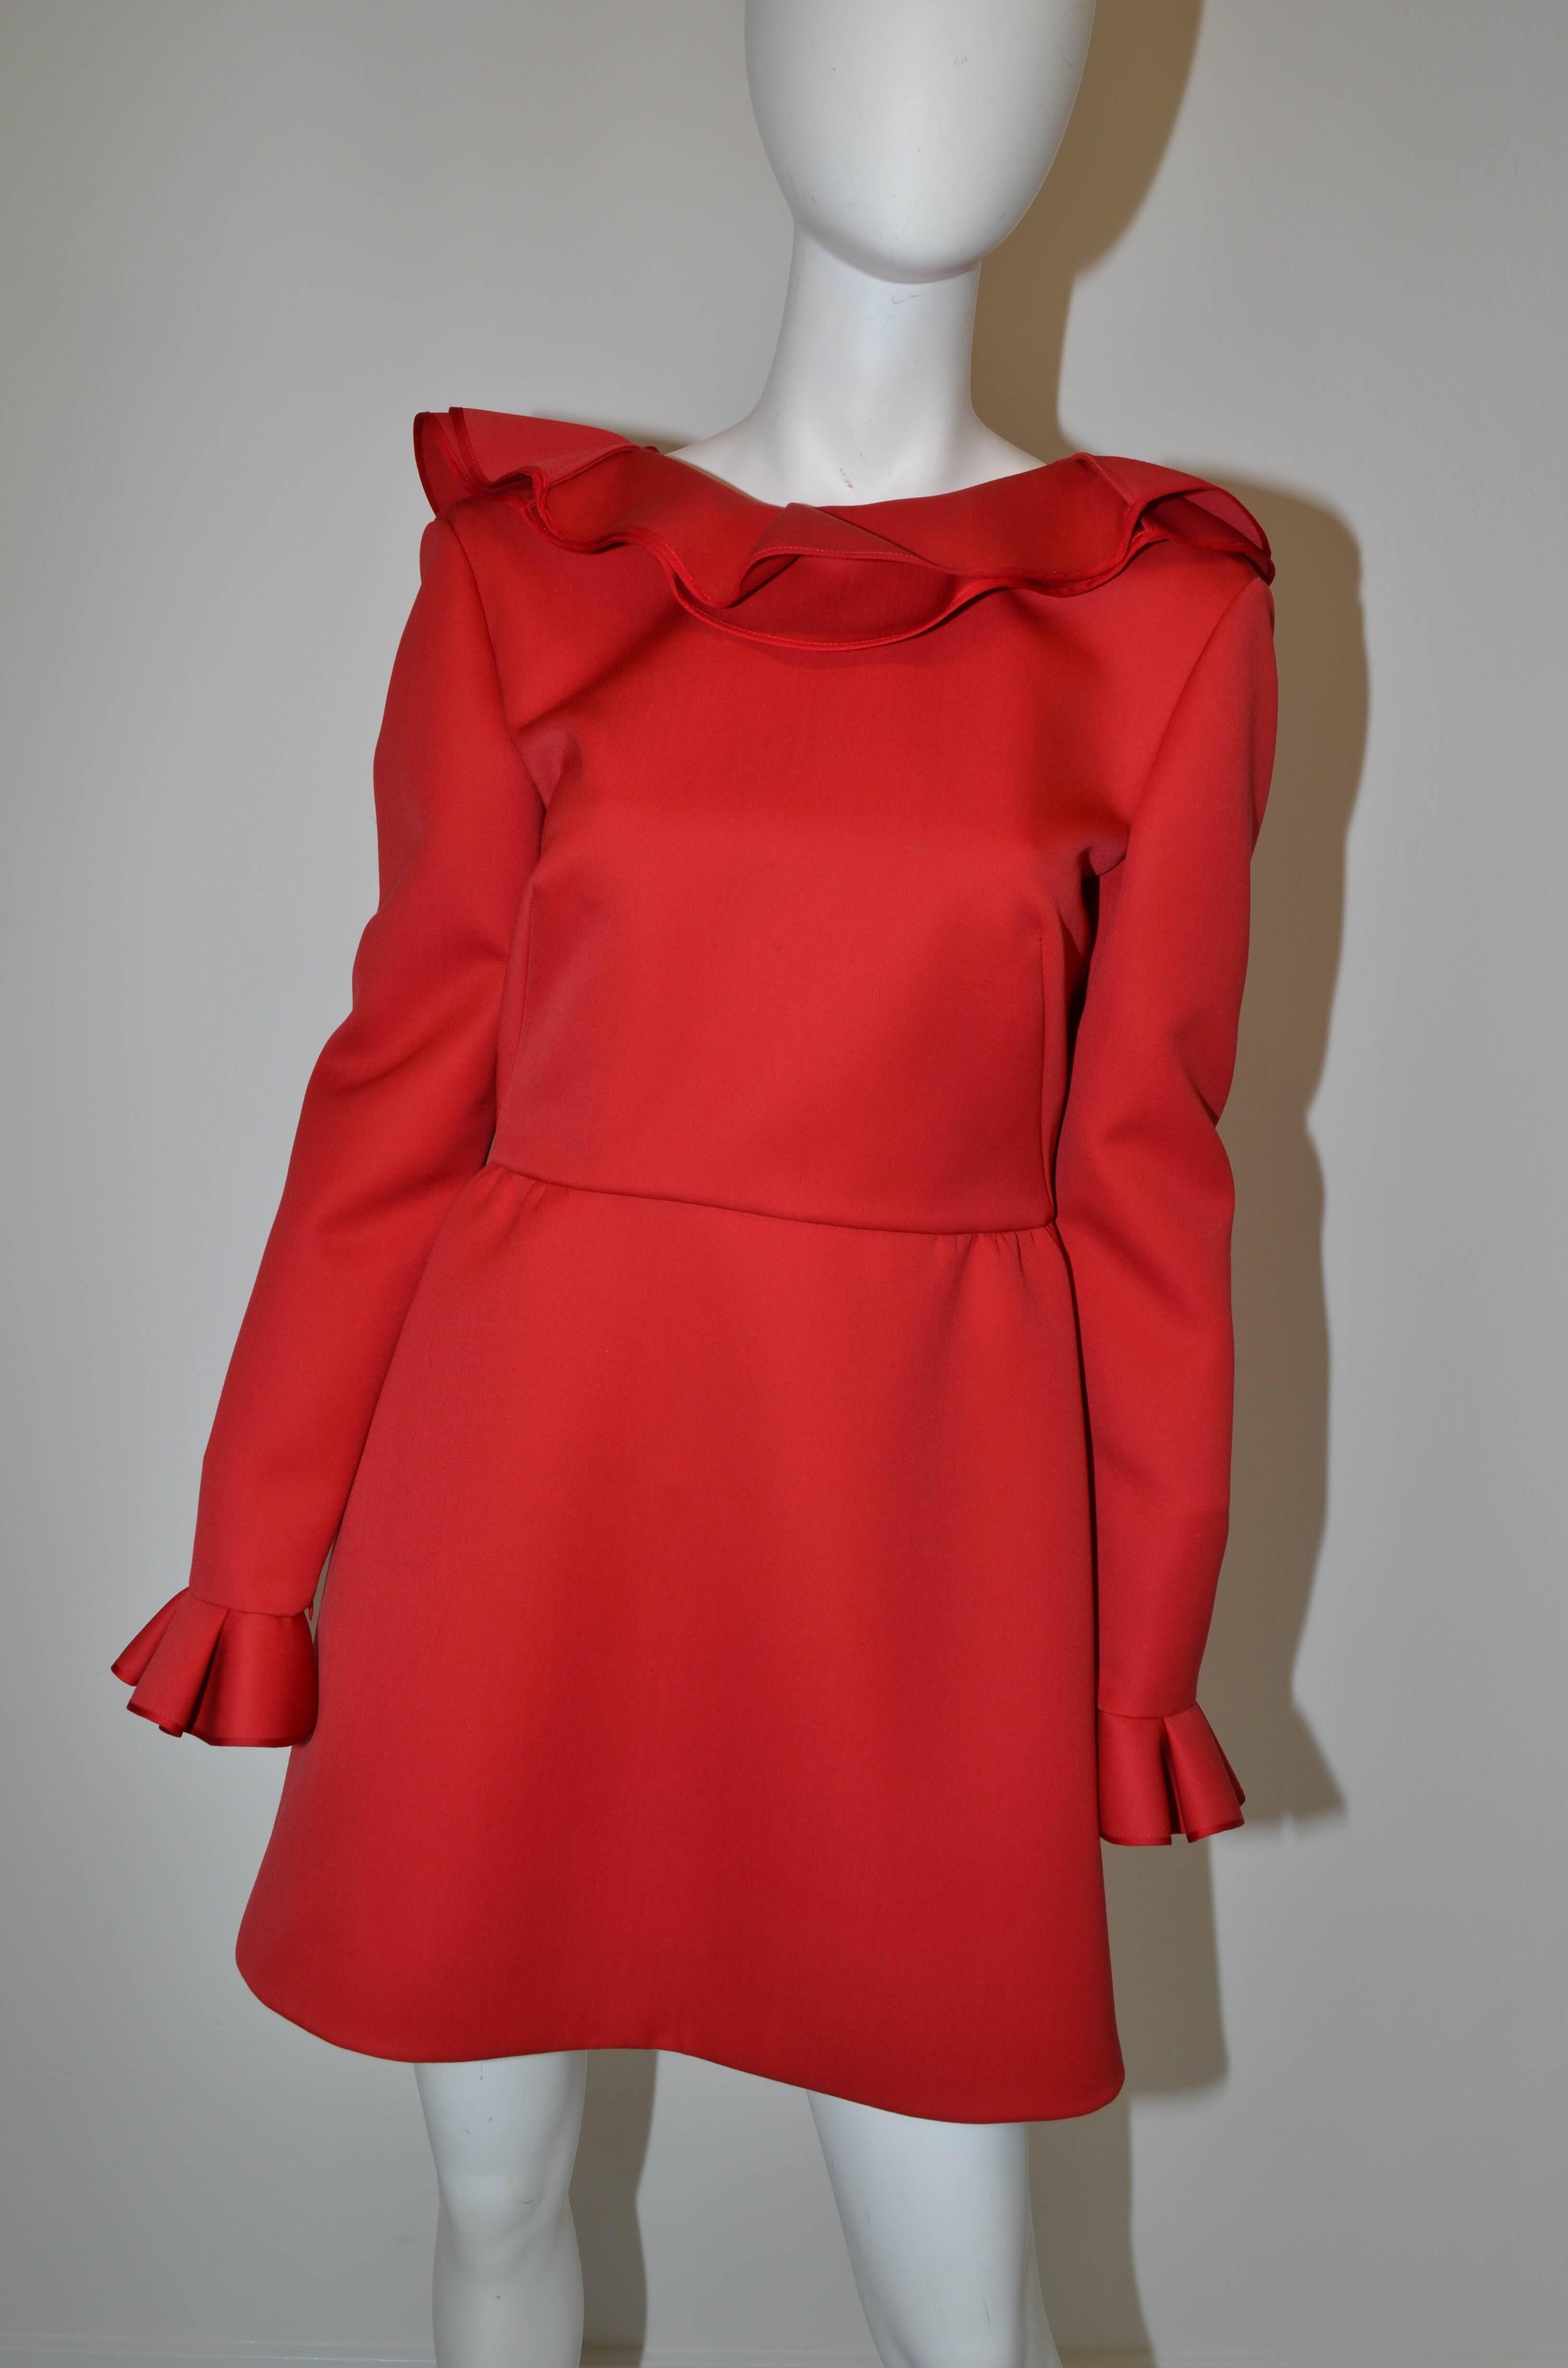 Valentino Wool Dress in Red with Ruffle 3